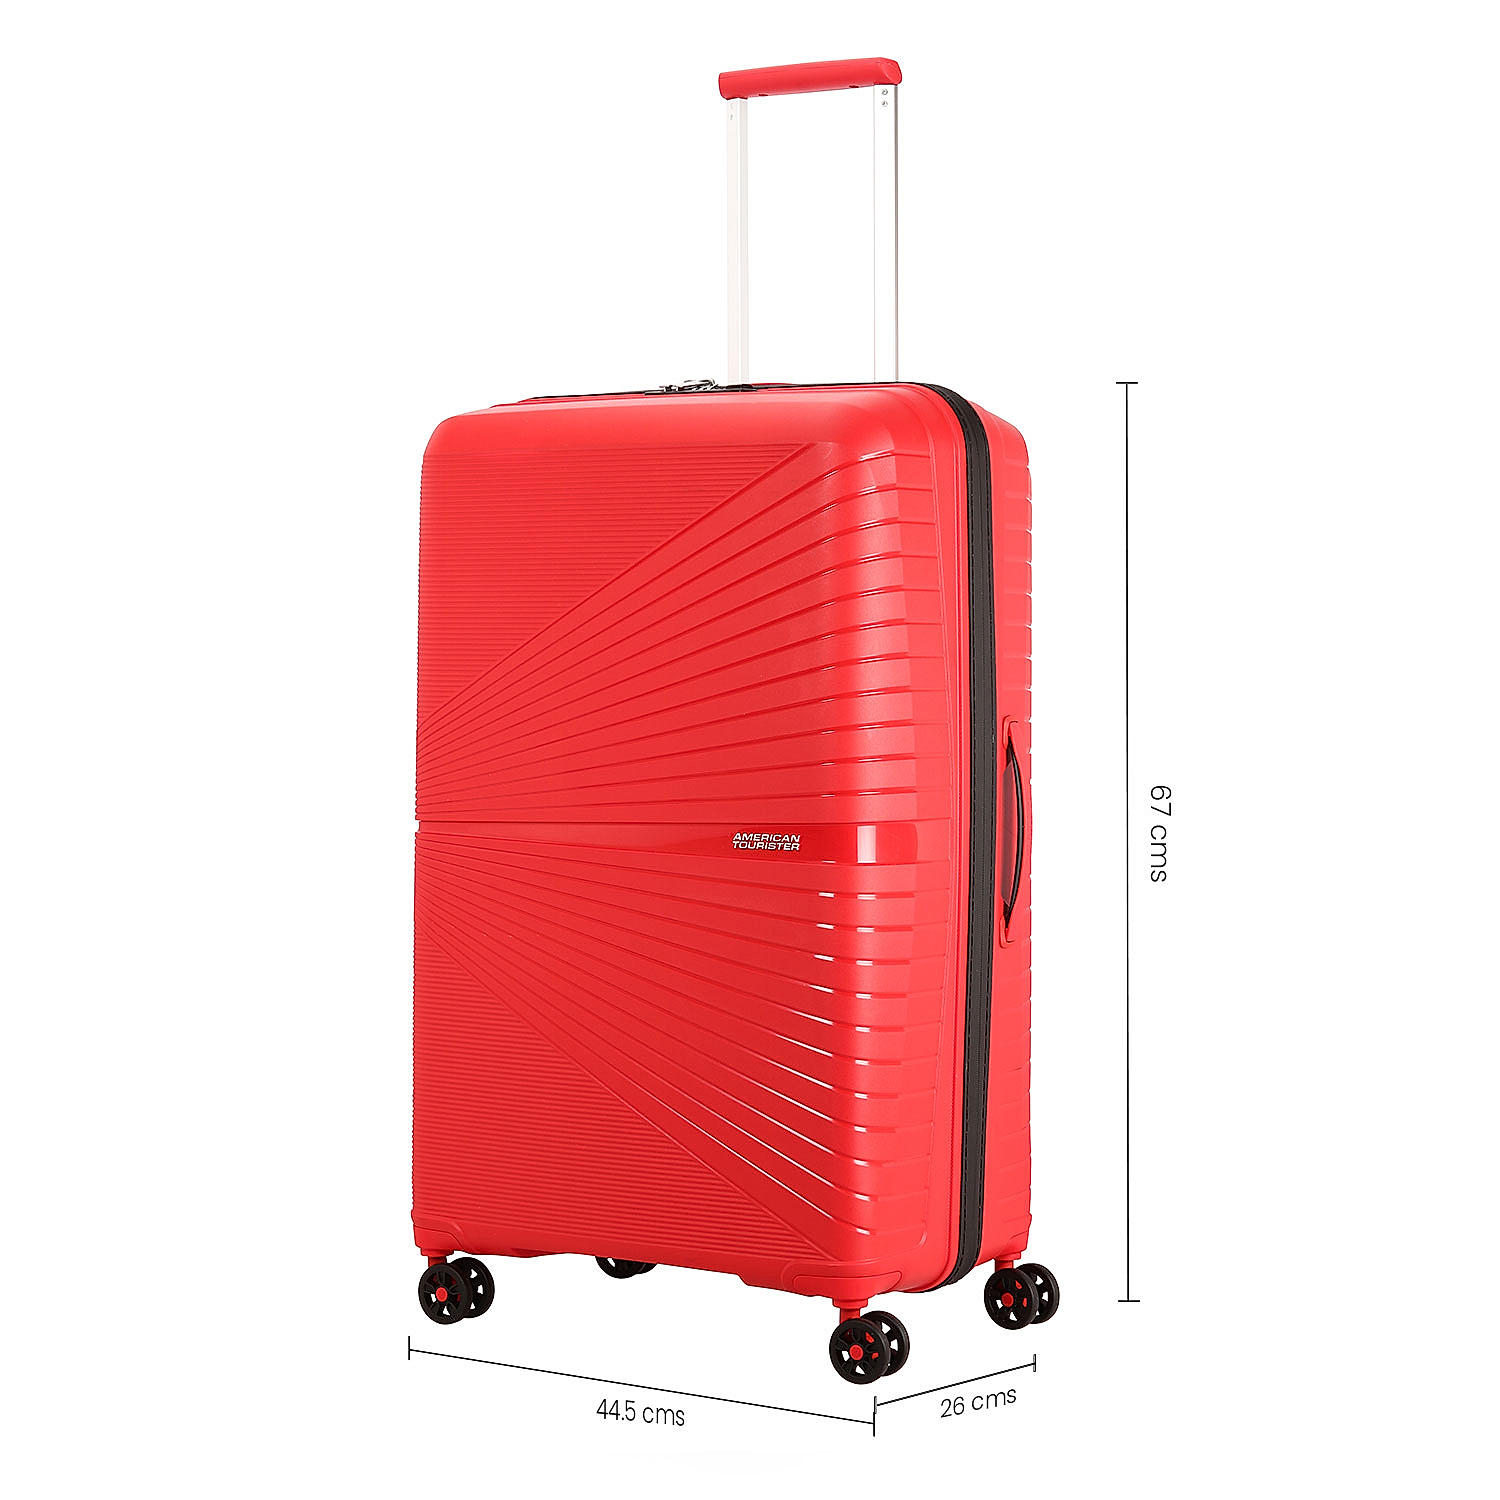 Buy Color Blast 2 Piece Set for USD 149.99 | American Tourister